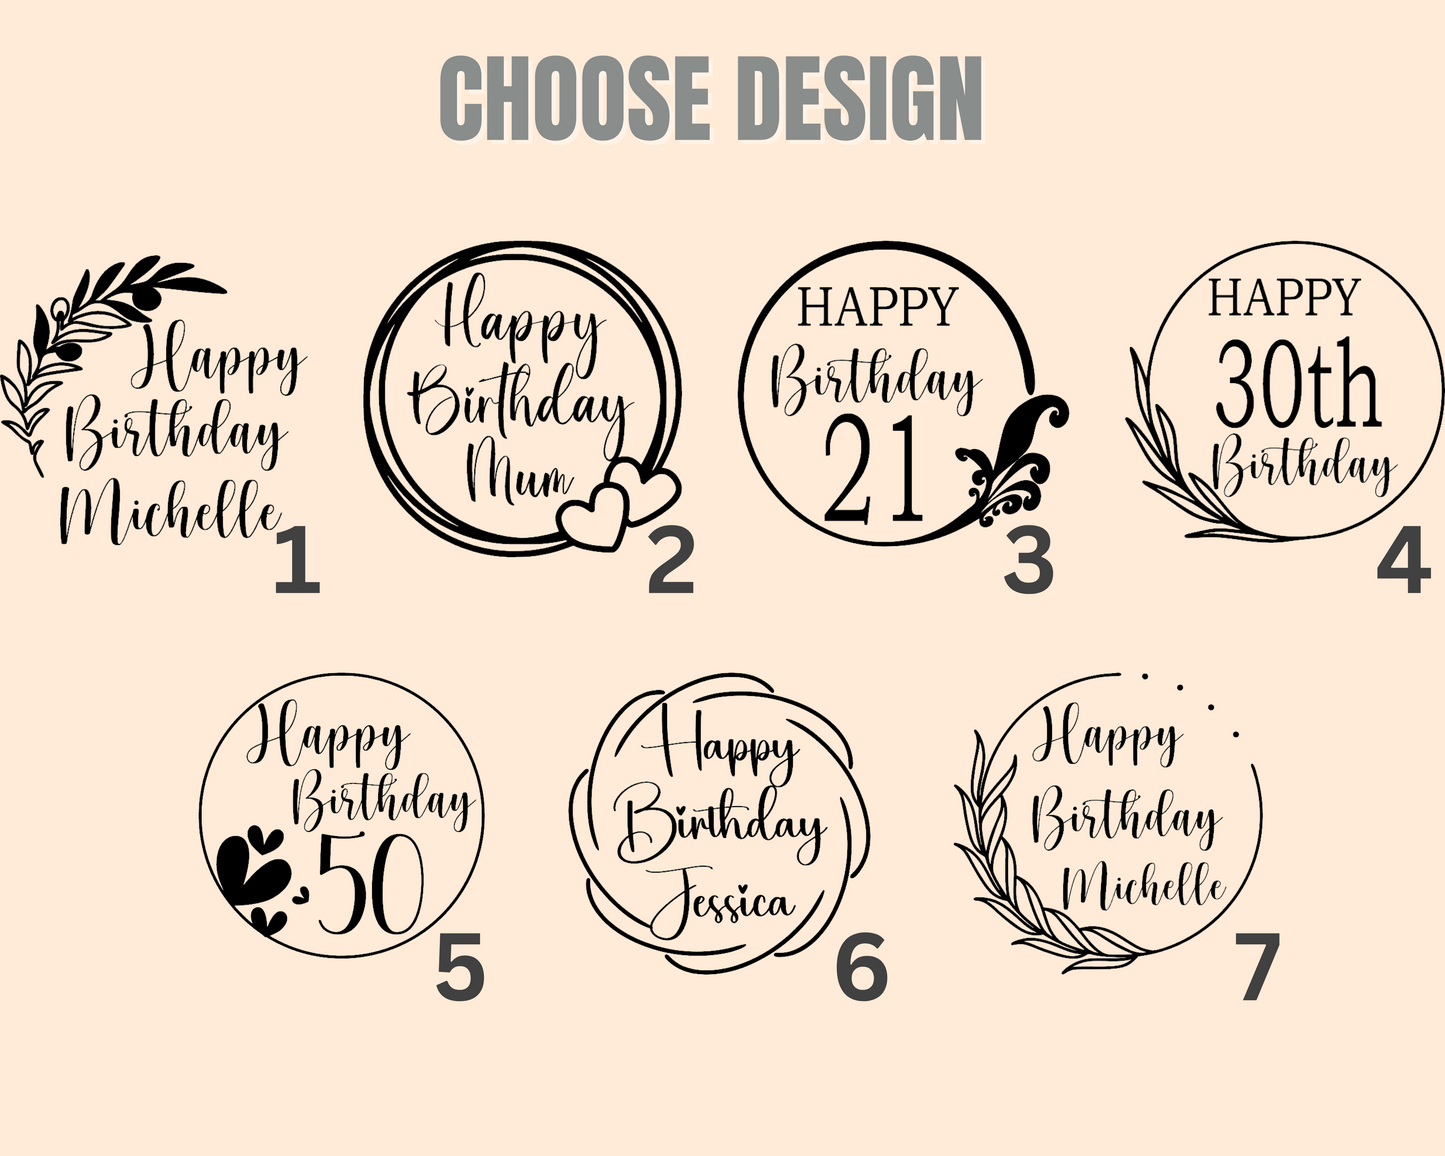 Personalised Acrylic Cake Topper, Clear or Marble Effect Round Cake Topper